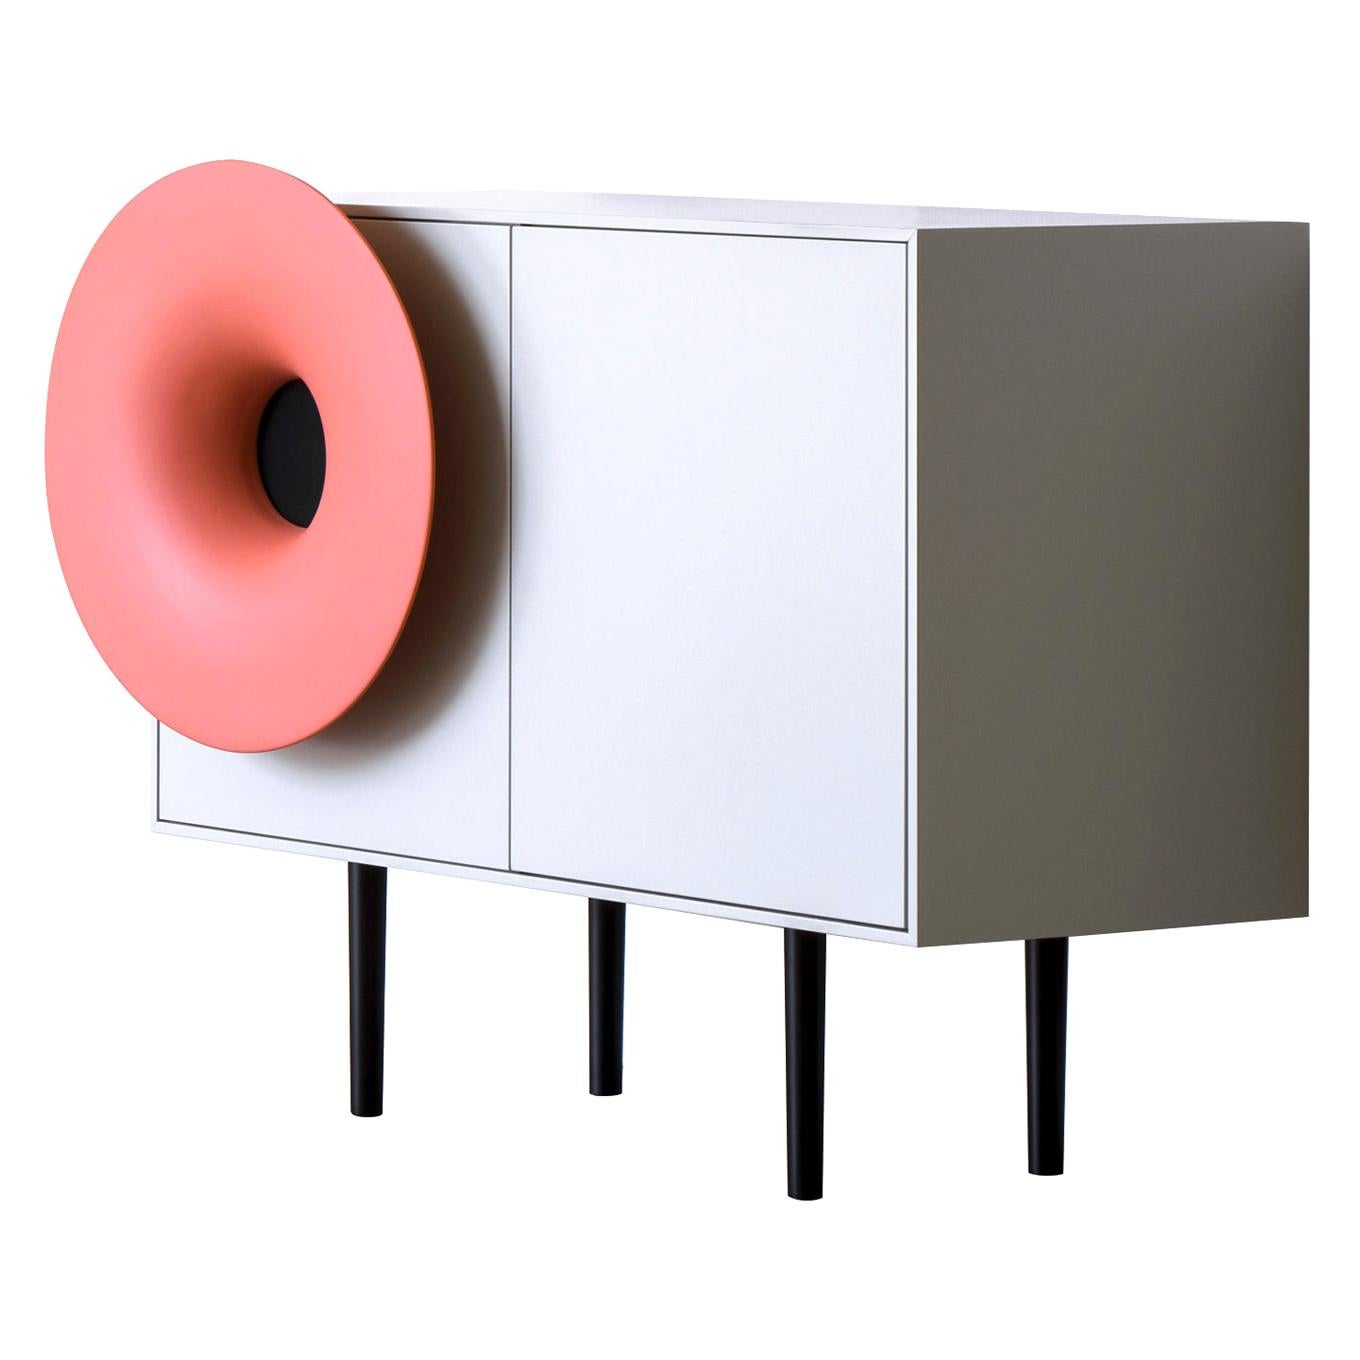 For Sale: Pink (Ceramic Coral Pink) Caruso Small Cabinet in White Lacquer Frame and Black Legs, by Paolo Cappello